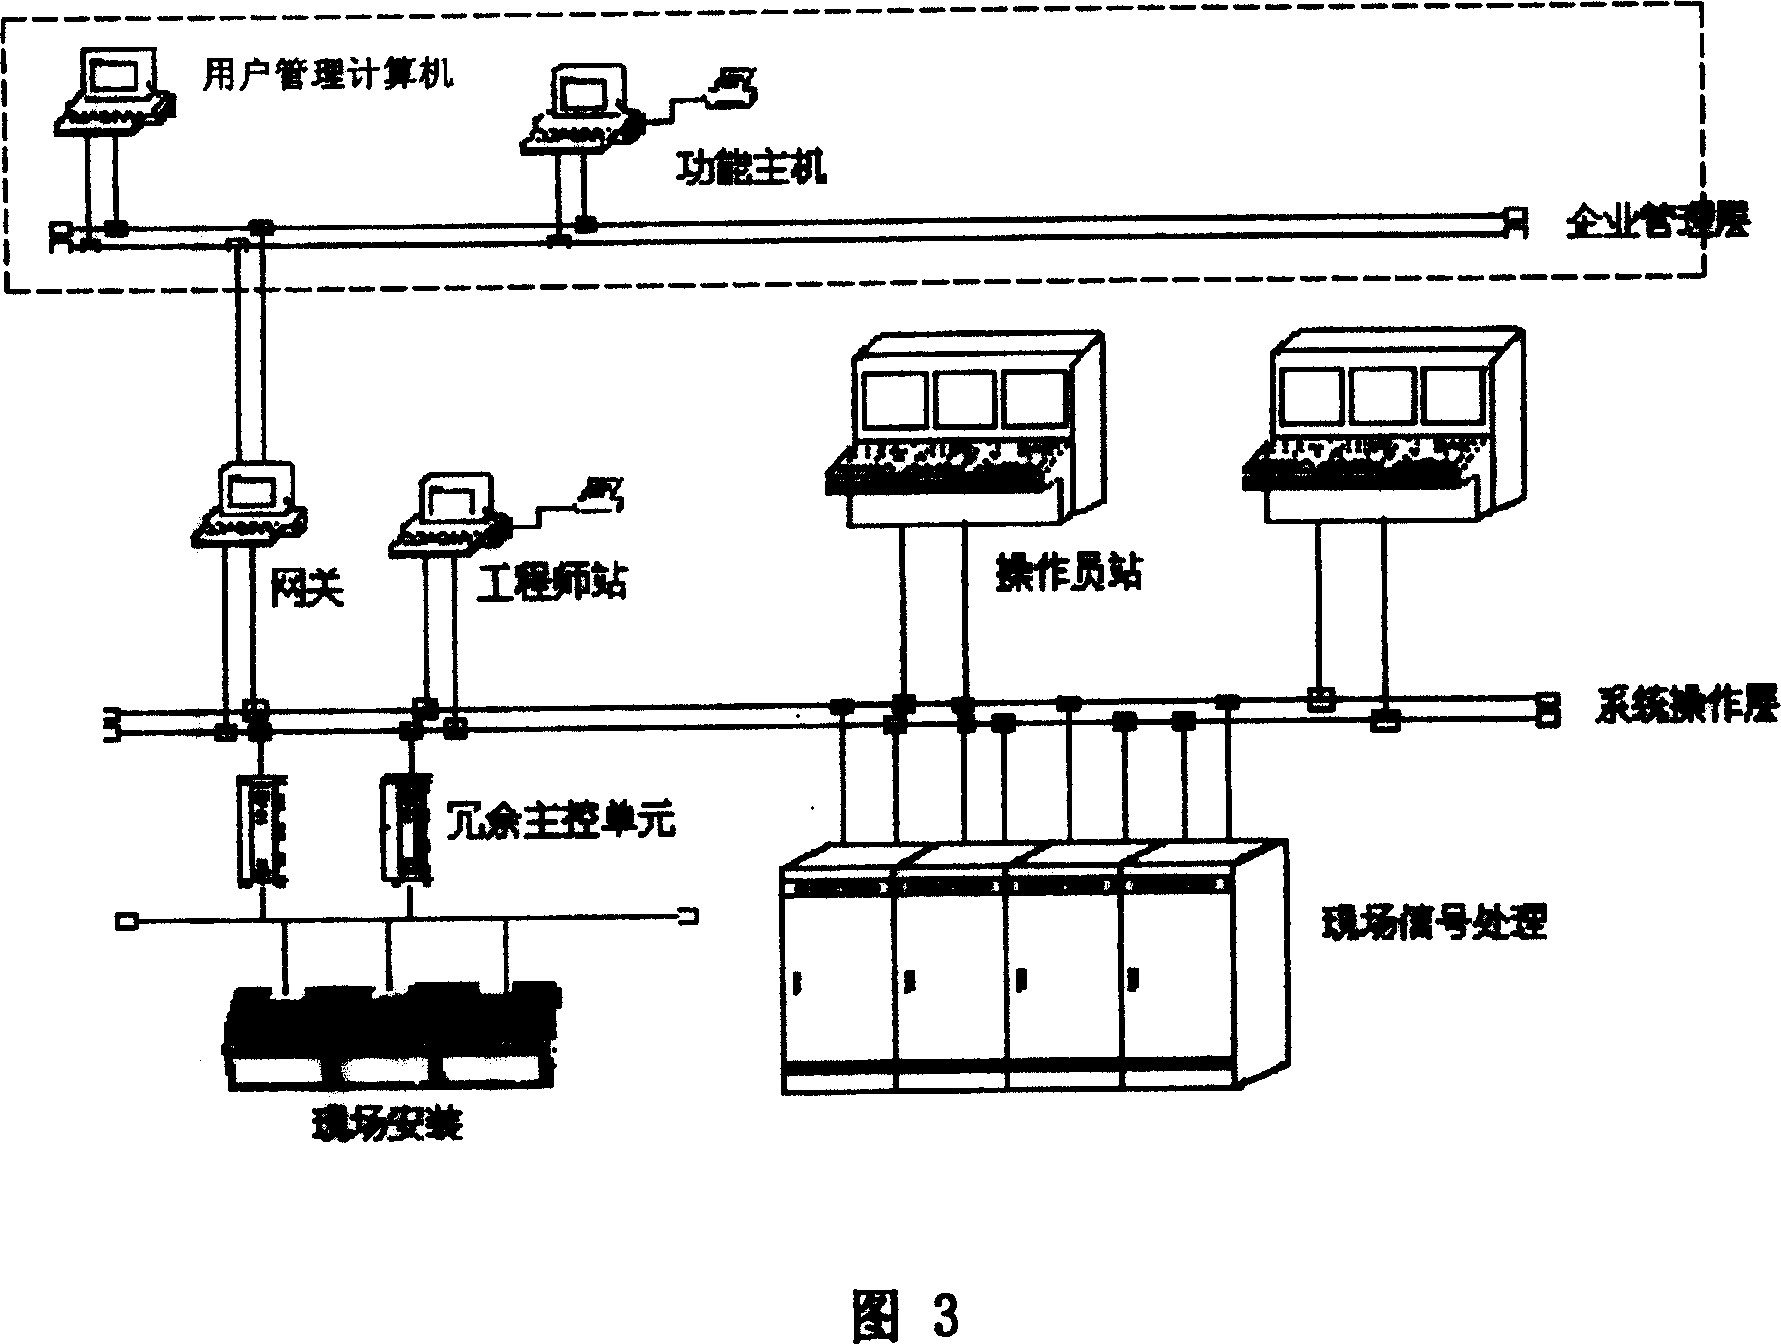 Sludge anhydration and burning process, and its systematic device